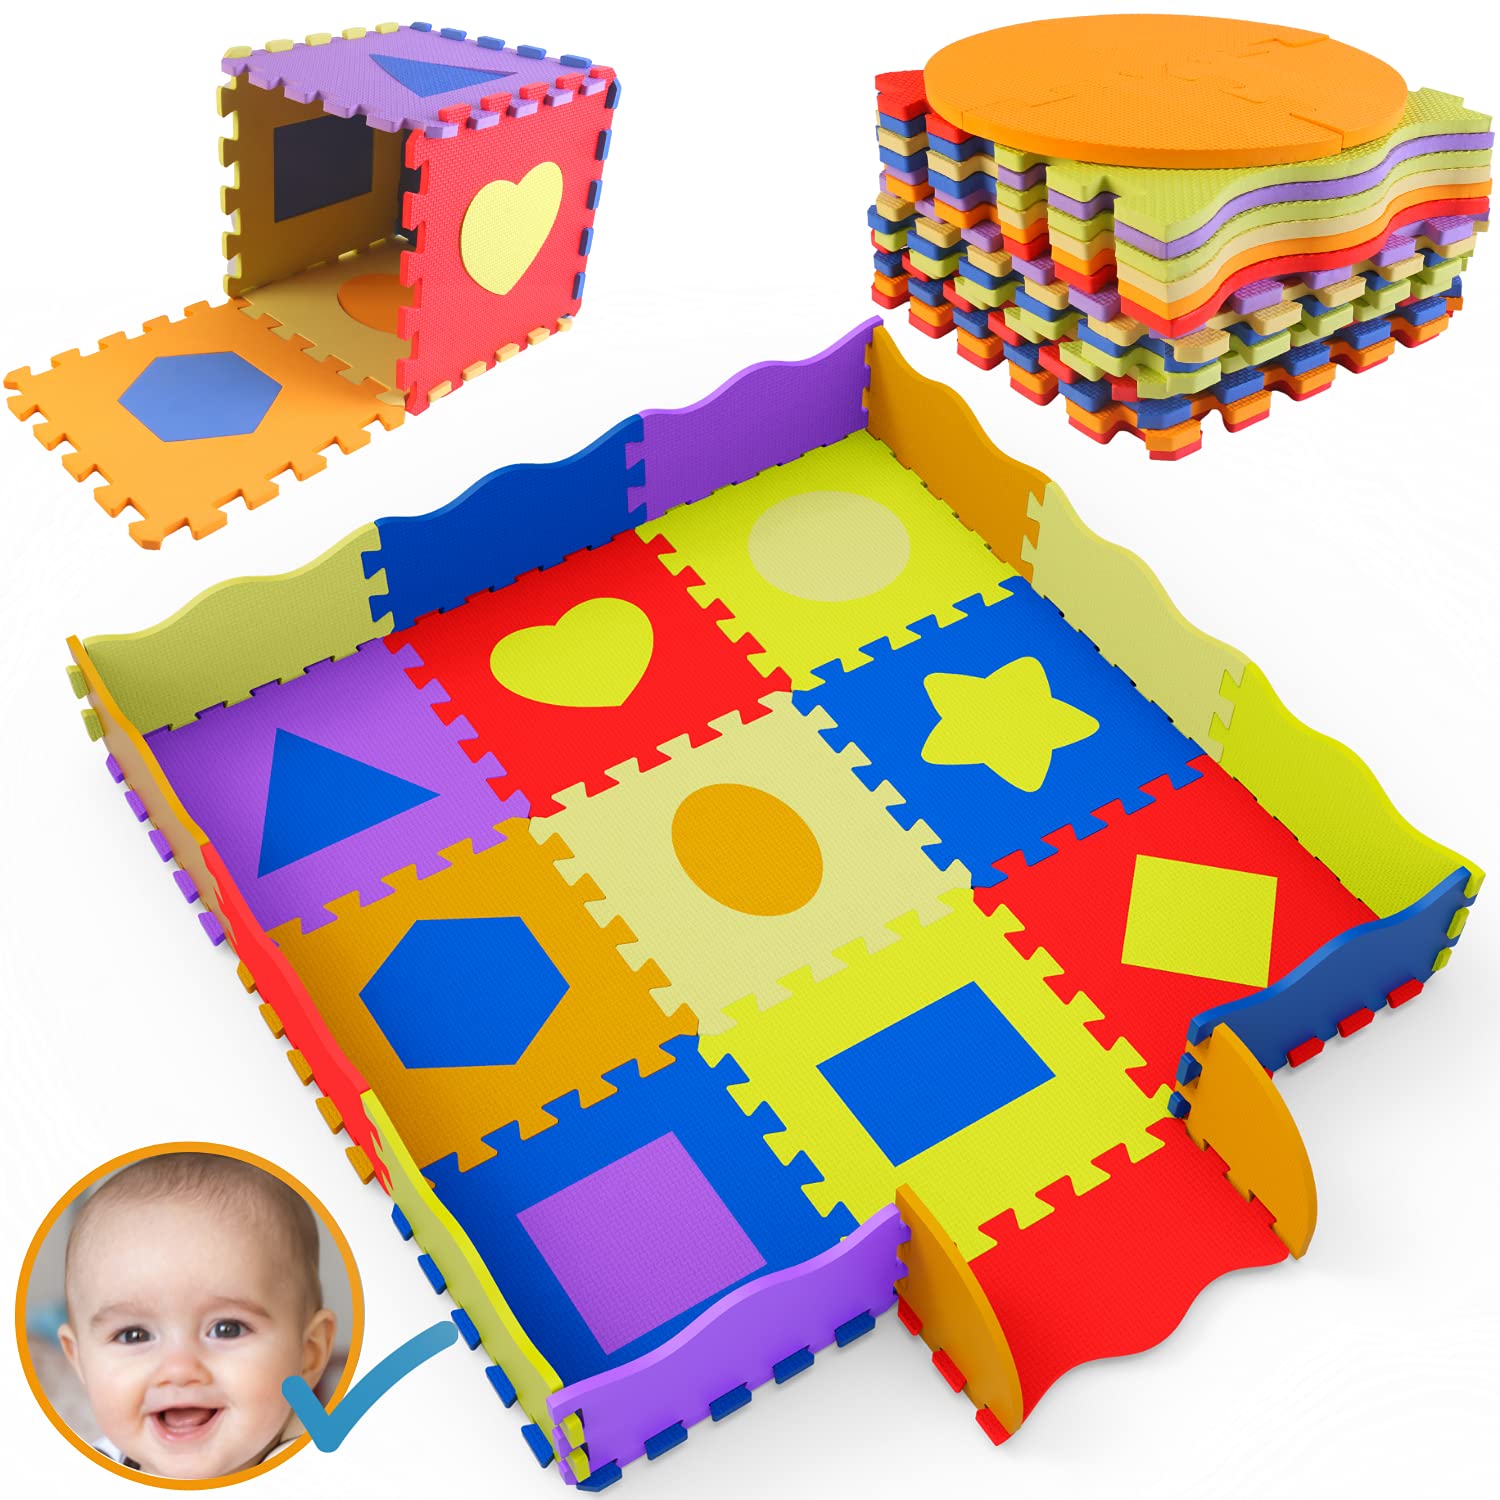 Baby Foam Play Mat | Mets British Safety Standards | Thick Matting, Full Protection | Foam Playmat Tiles with Borders | Play Games with The Kids Play Mat for Floor